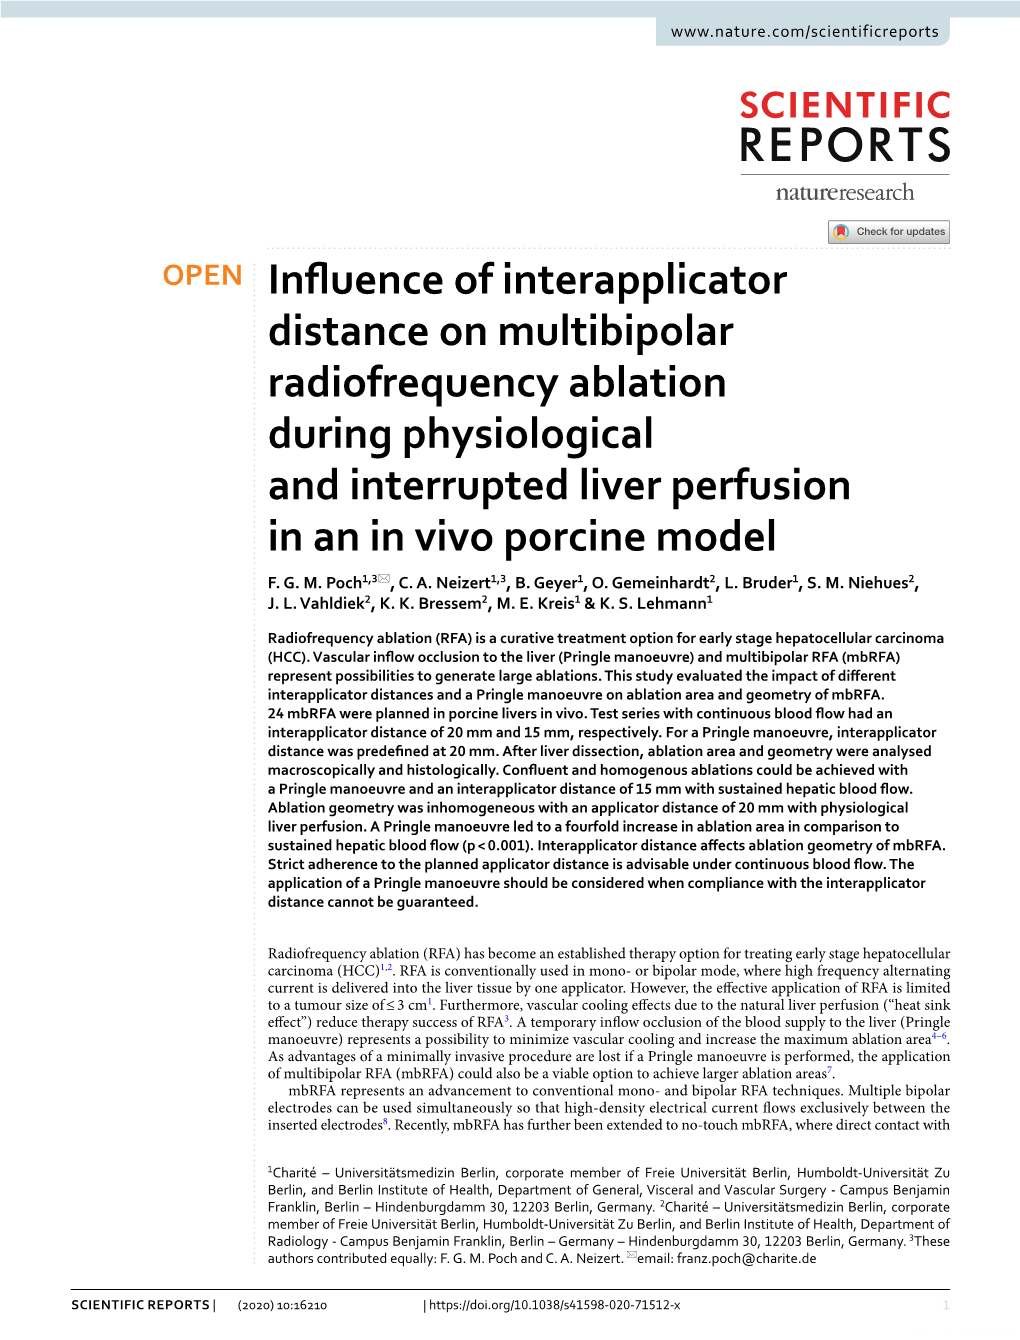 Influence of Interapplicator Distance on Multibipolar Radiofrequency